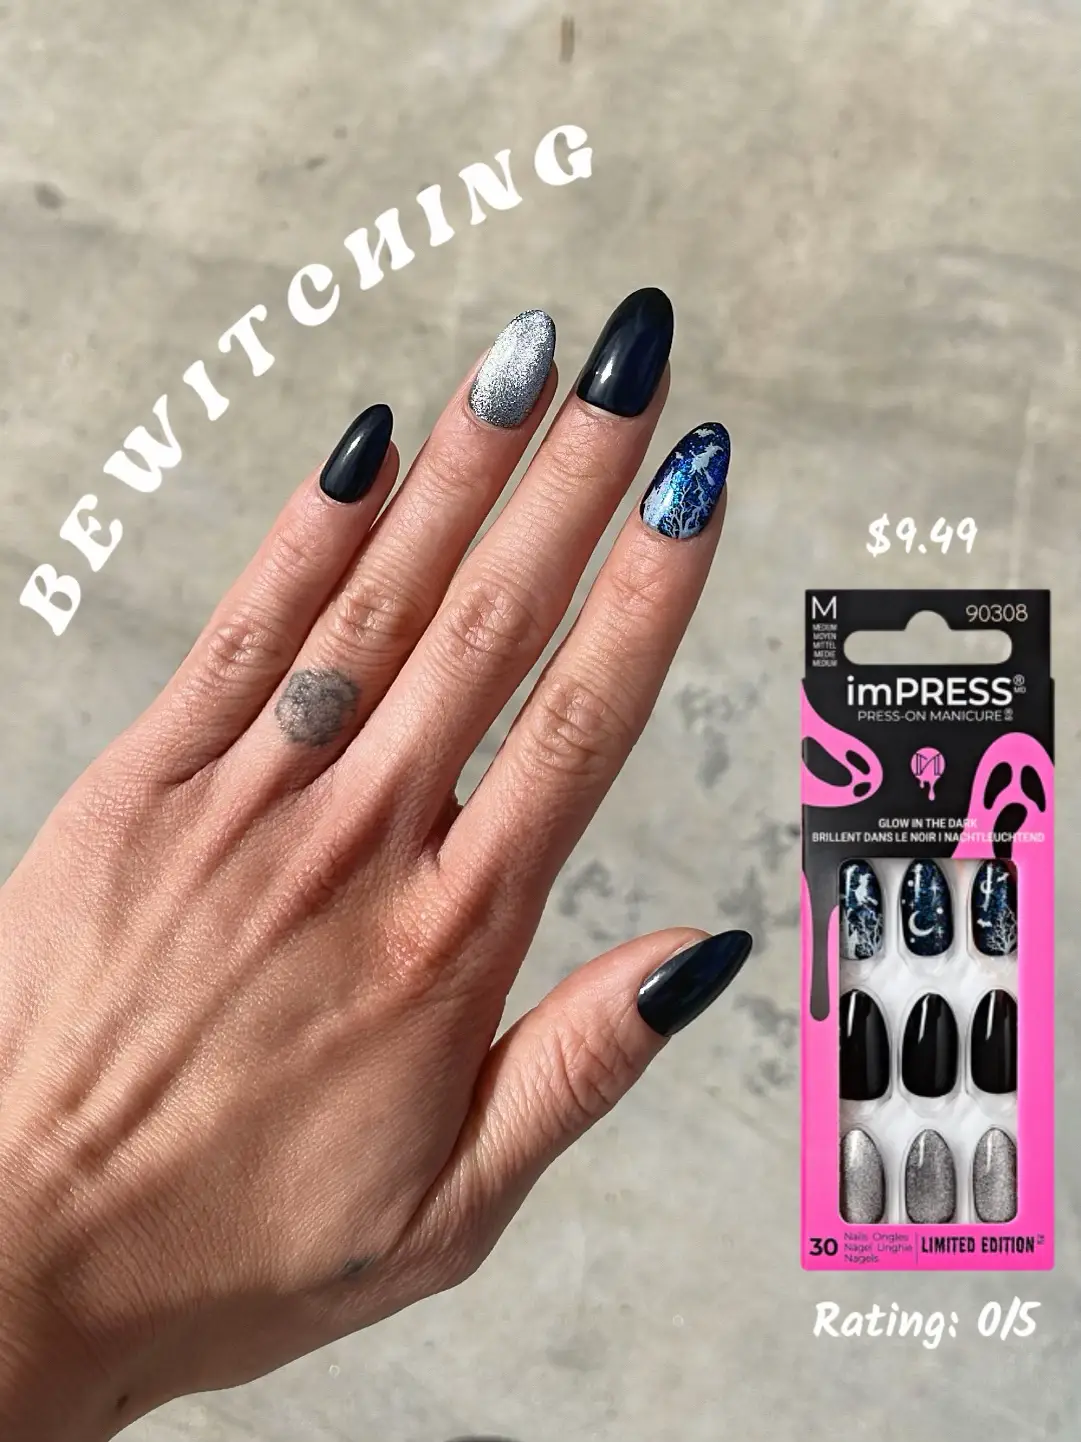 impress glow in the dark press on nails, limited edition